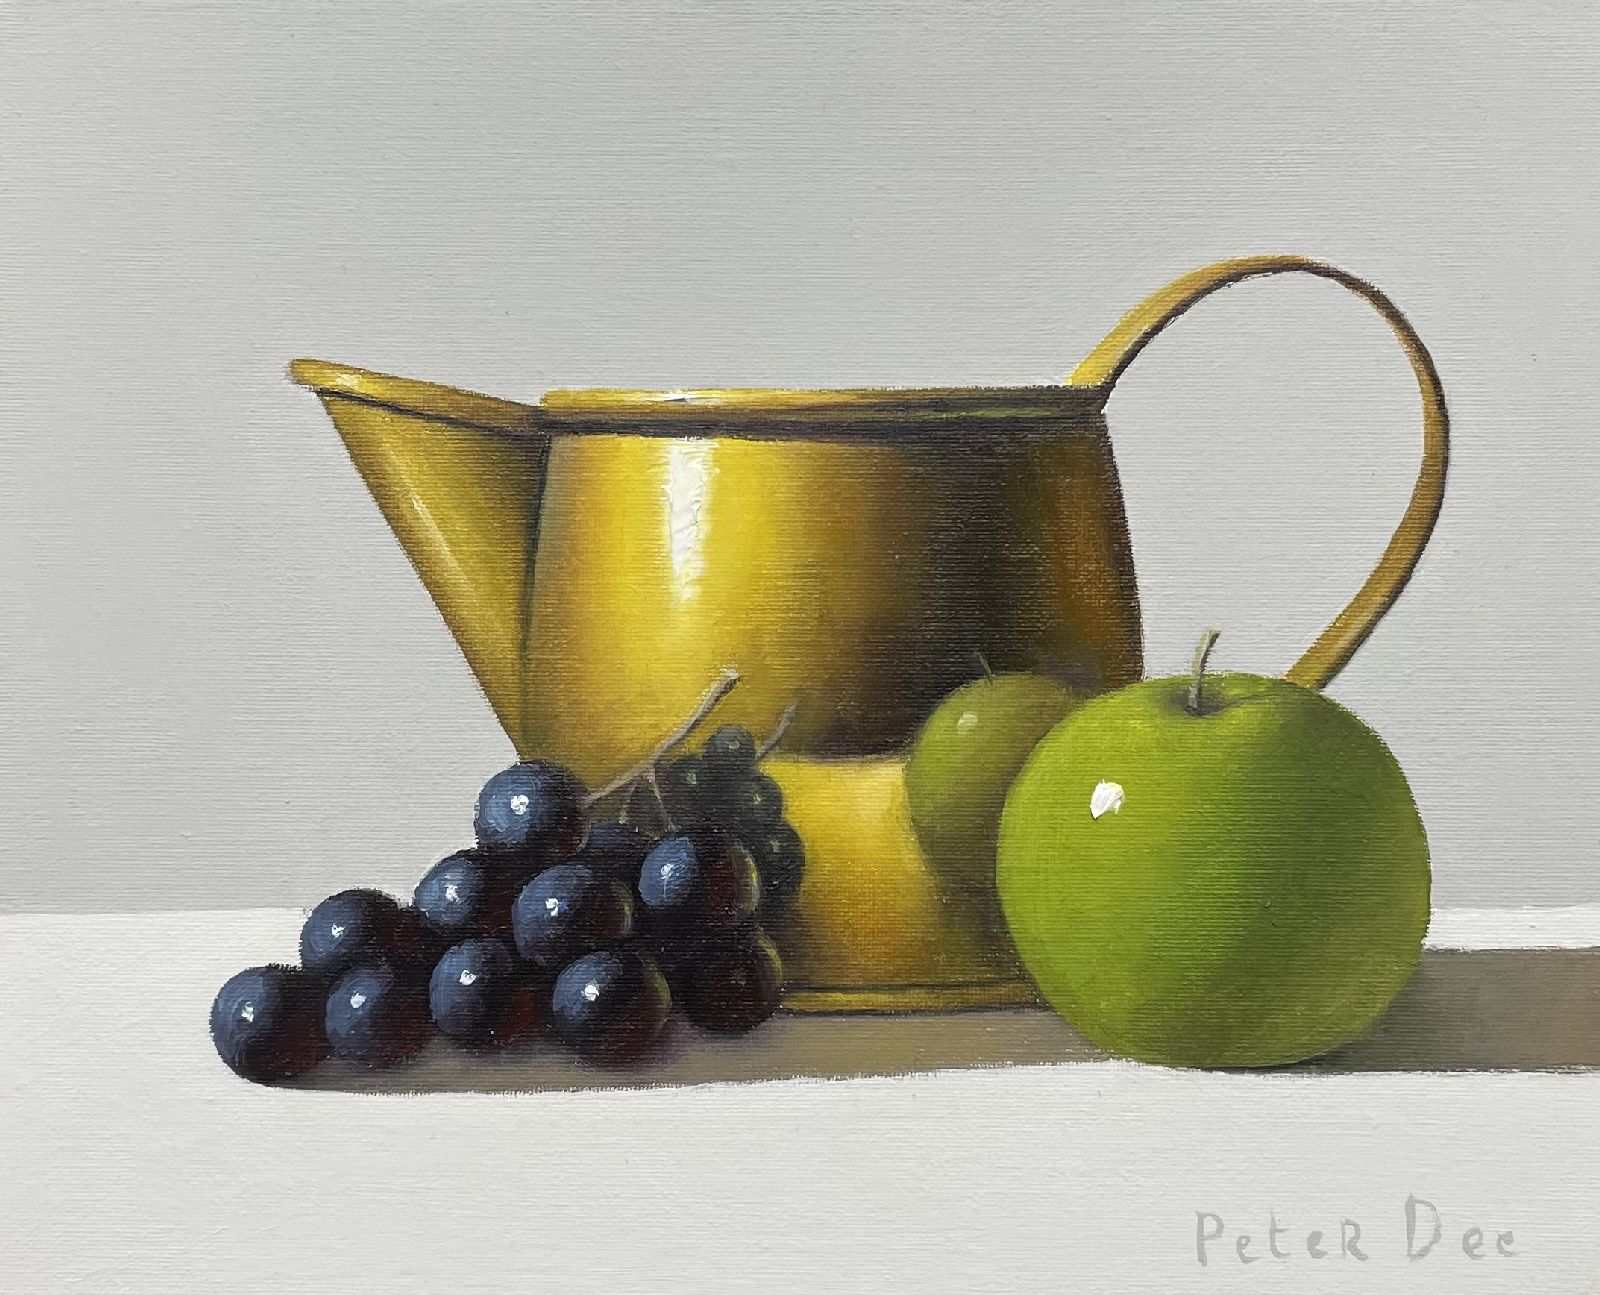 Peter Dee - Brass Jug with Apple and Grapes